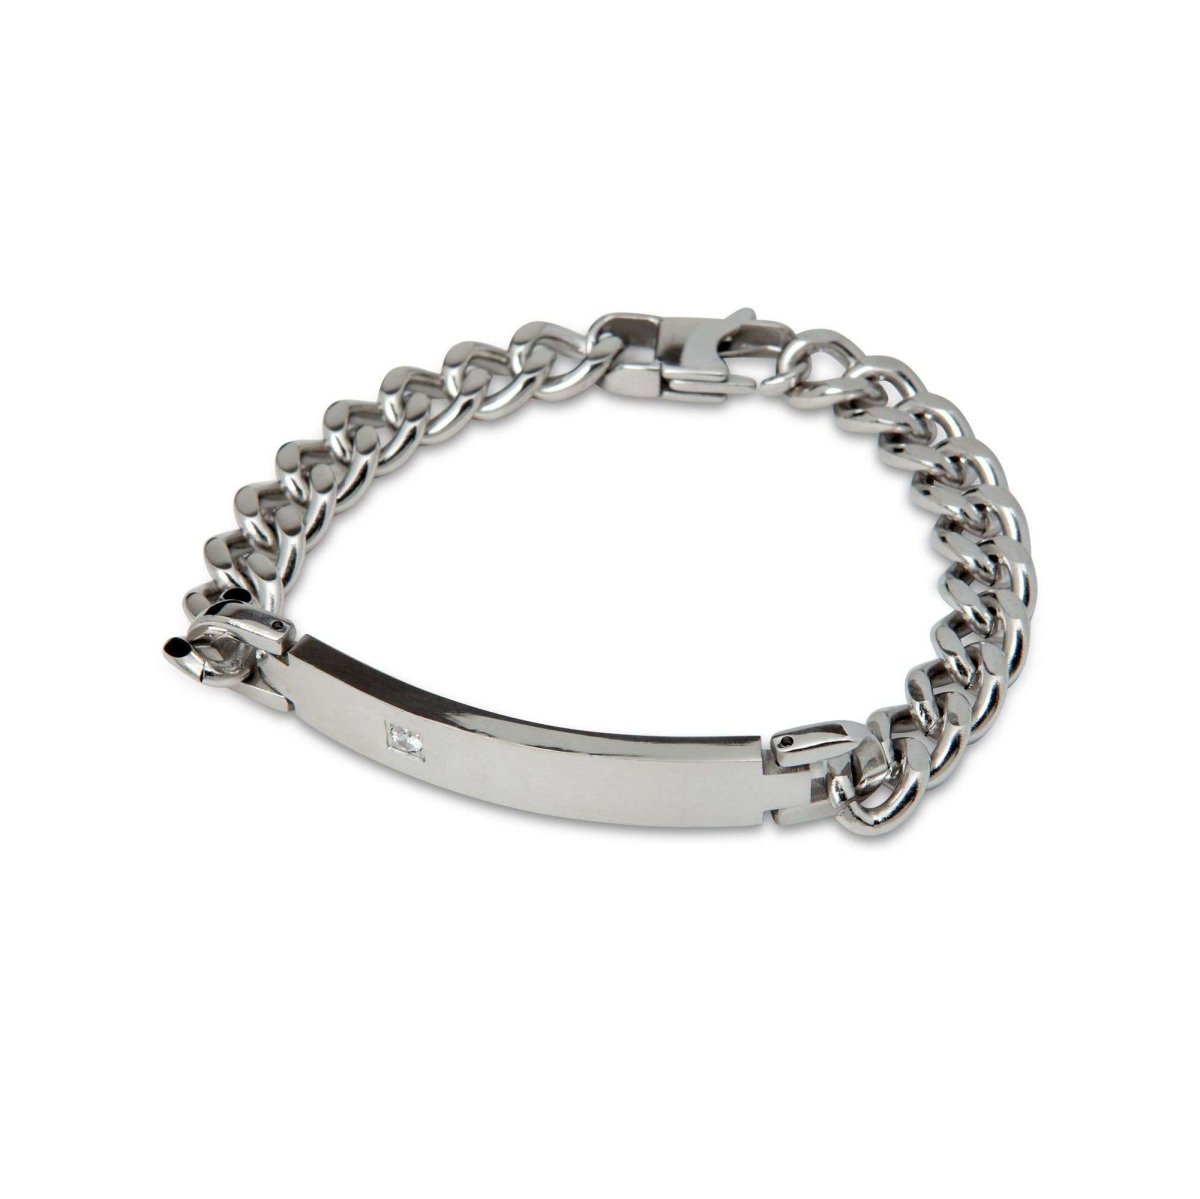 Diamond Embedded Silver Band Chain Bracelet - MenSuits